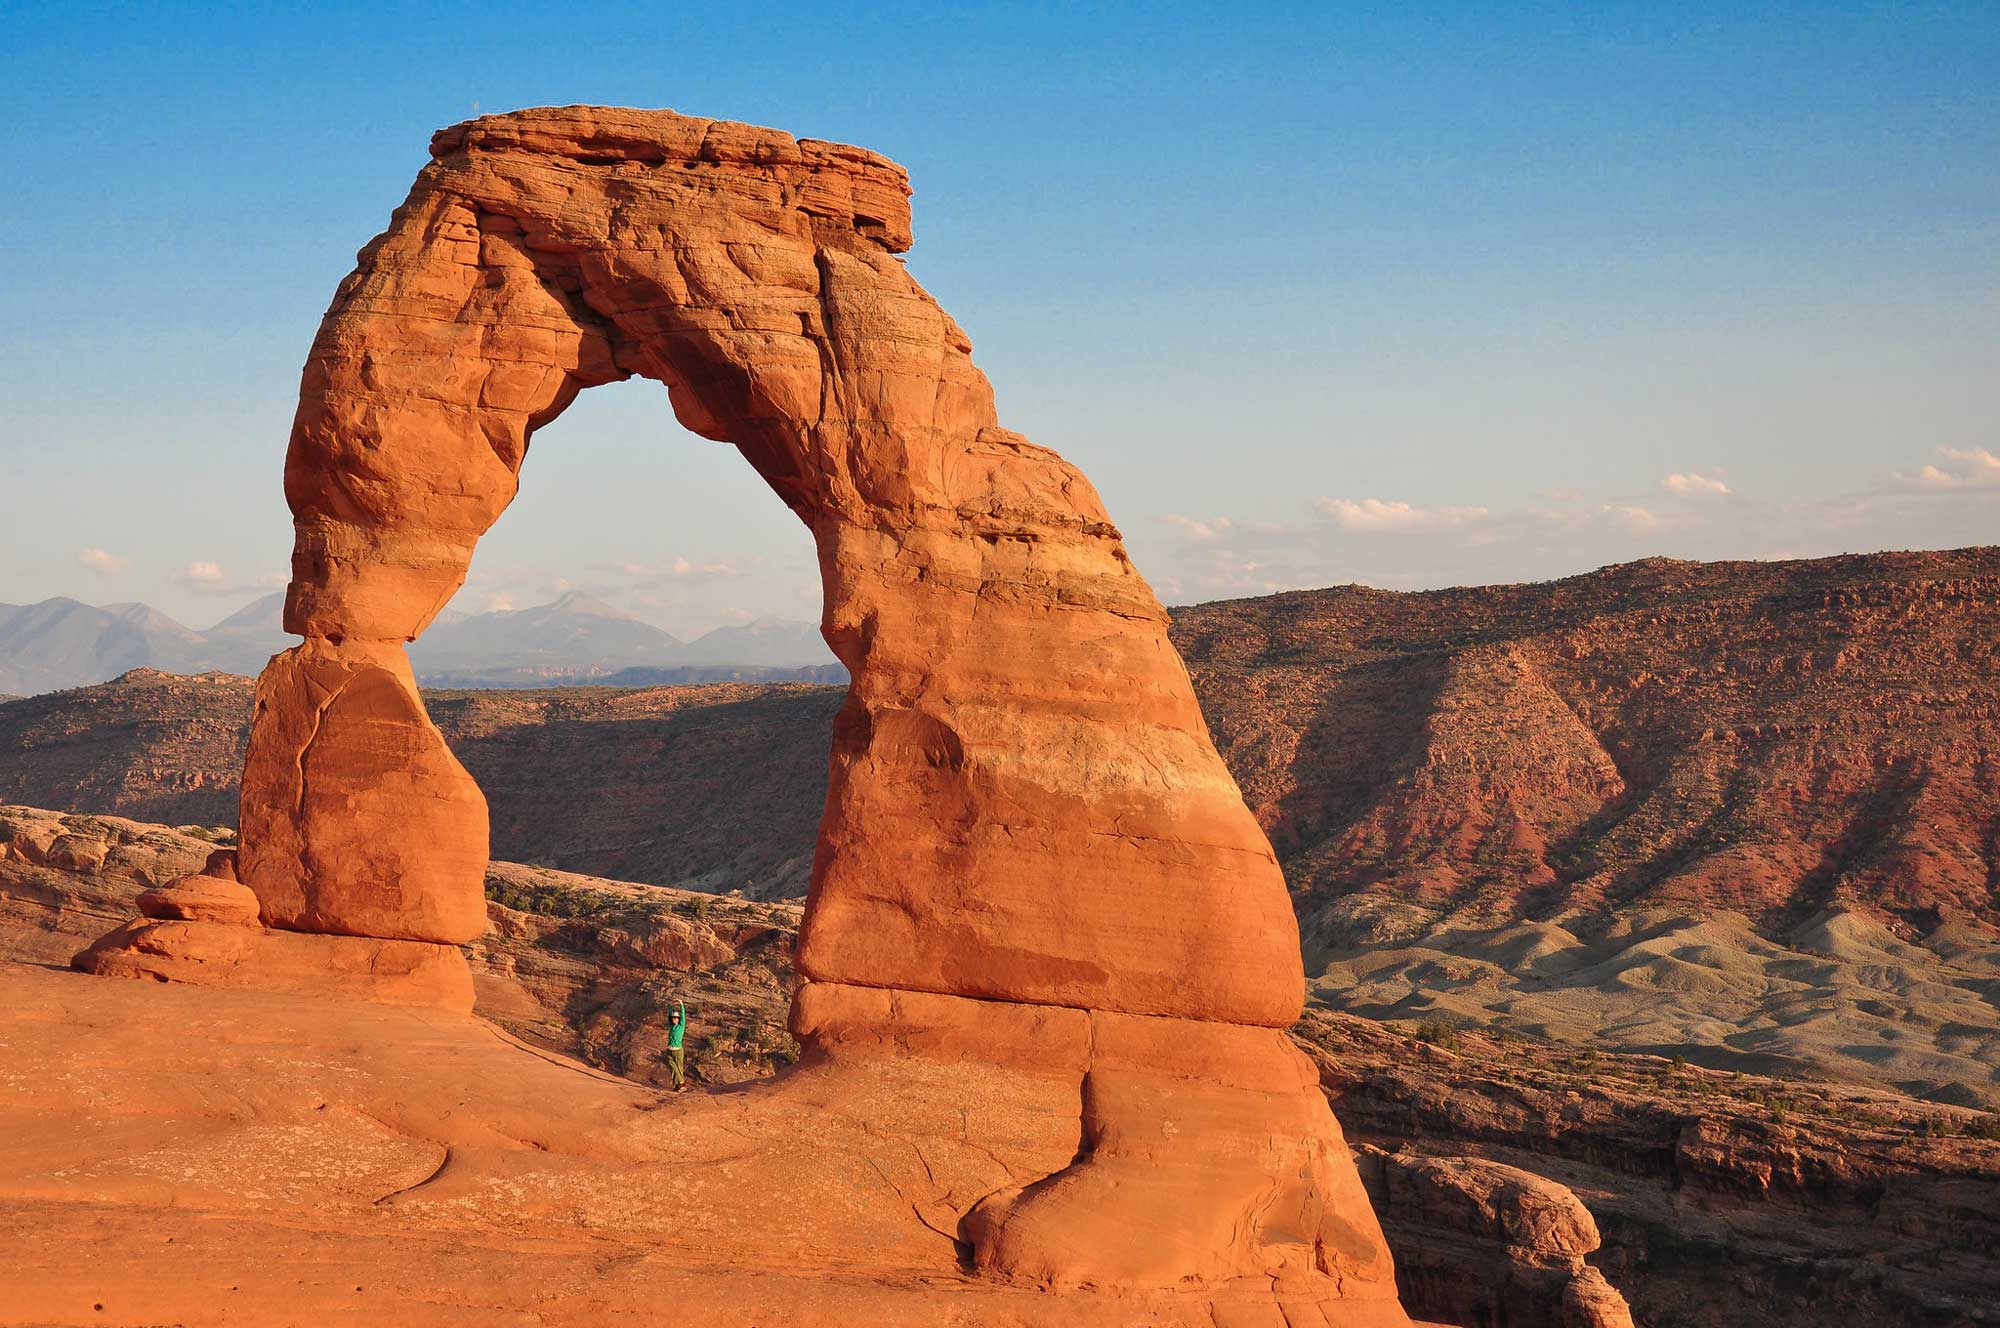 Photograph of Delicate Arch in Utah.